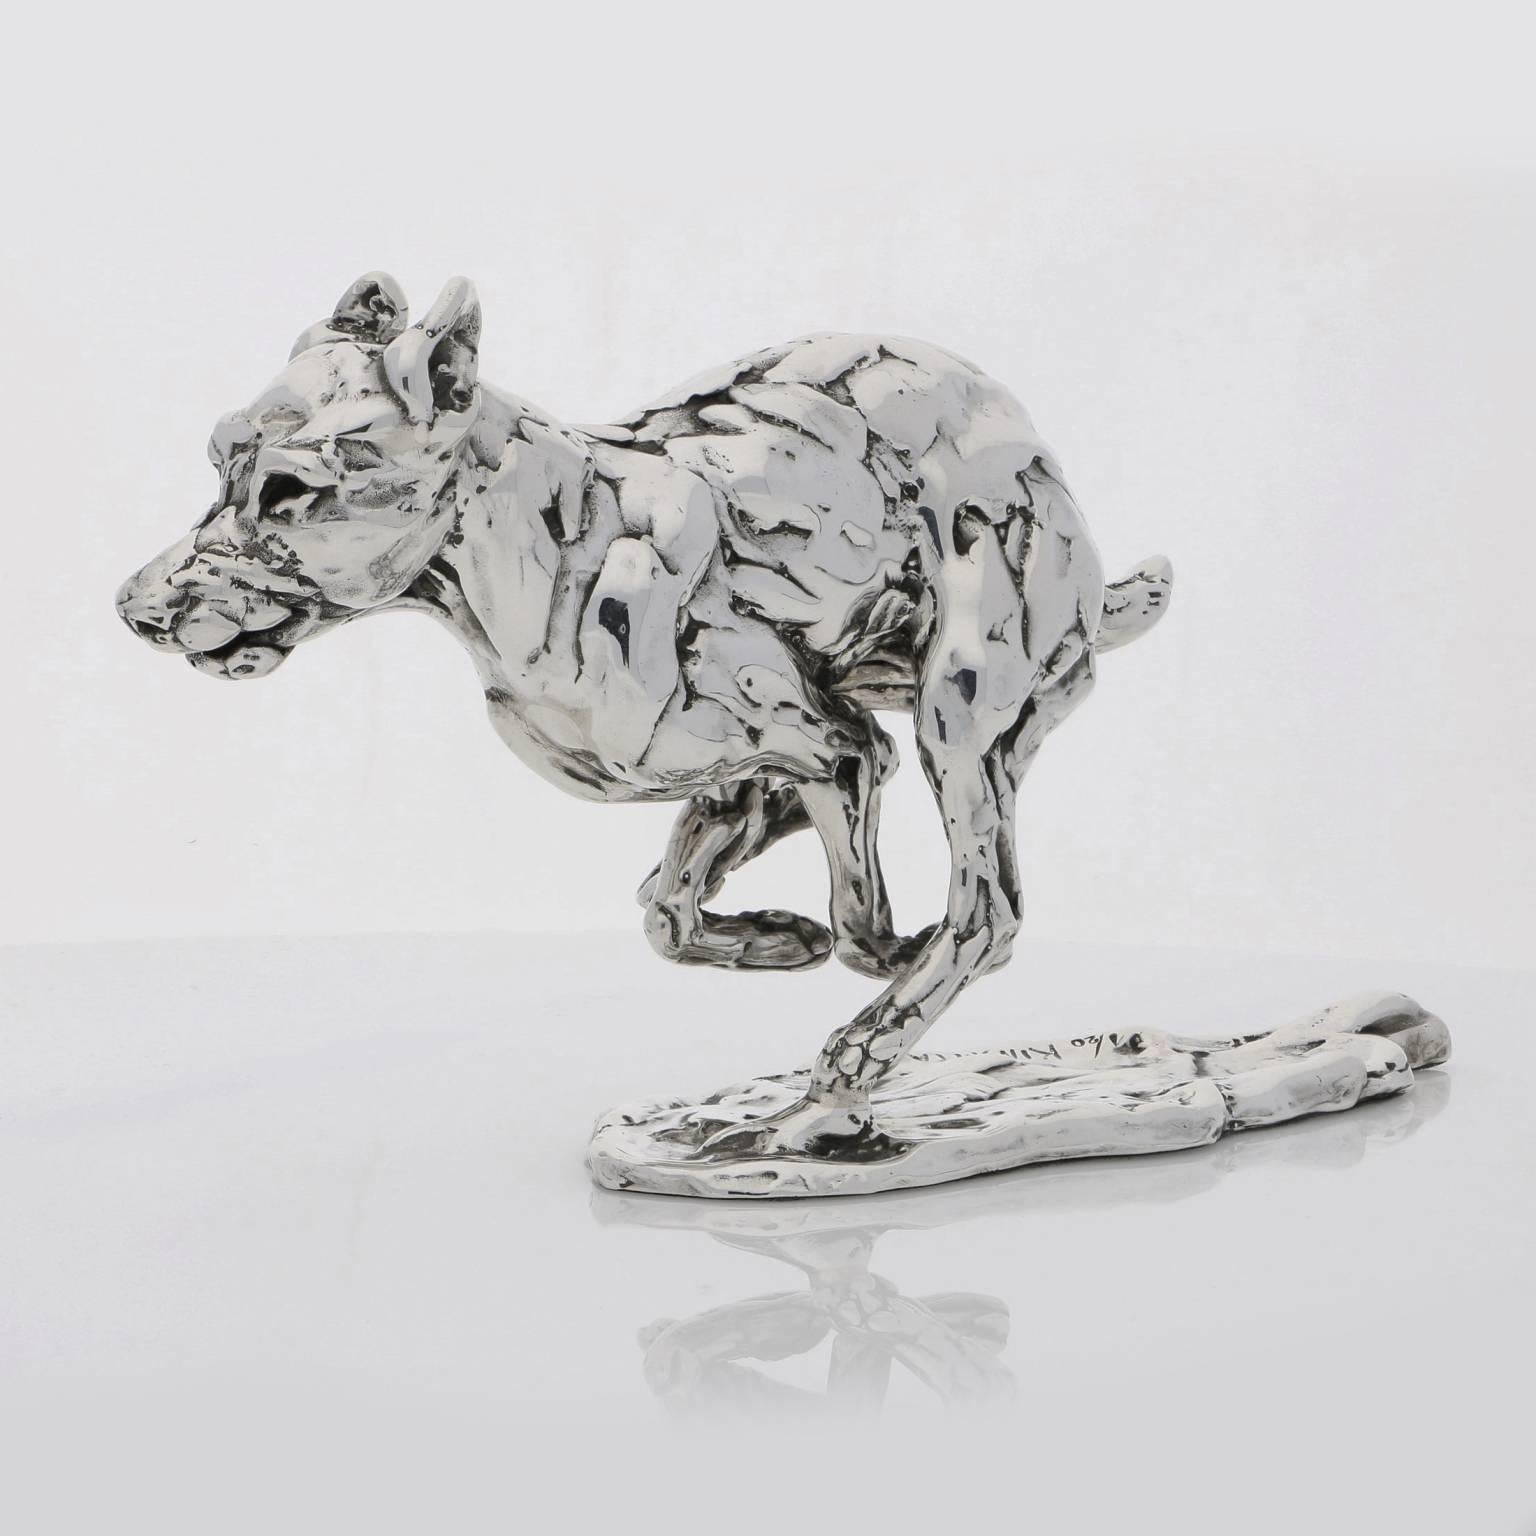 Lucy Kinsella exclusive to Hancocks
Length 17cm x height 9cm
395 grams

The limited edition finely modelled terrier races across the ground, his muscles tense and body bunched, mid stride.  His gaze is focused intently in front of him and there is a